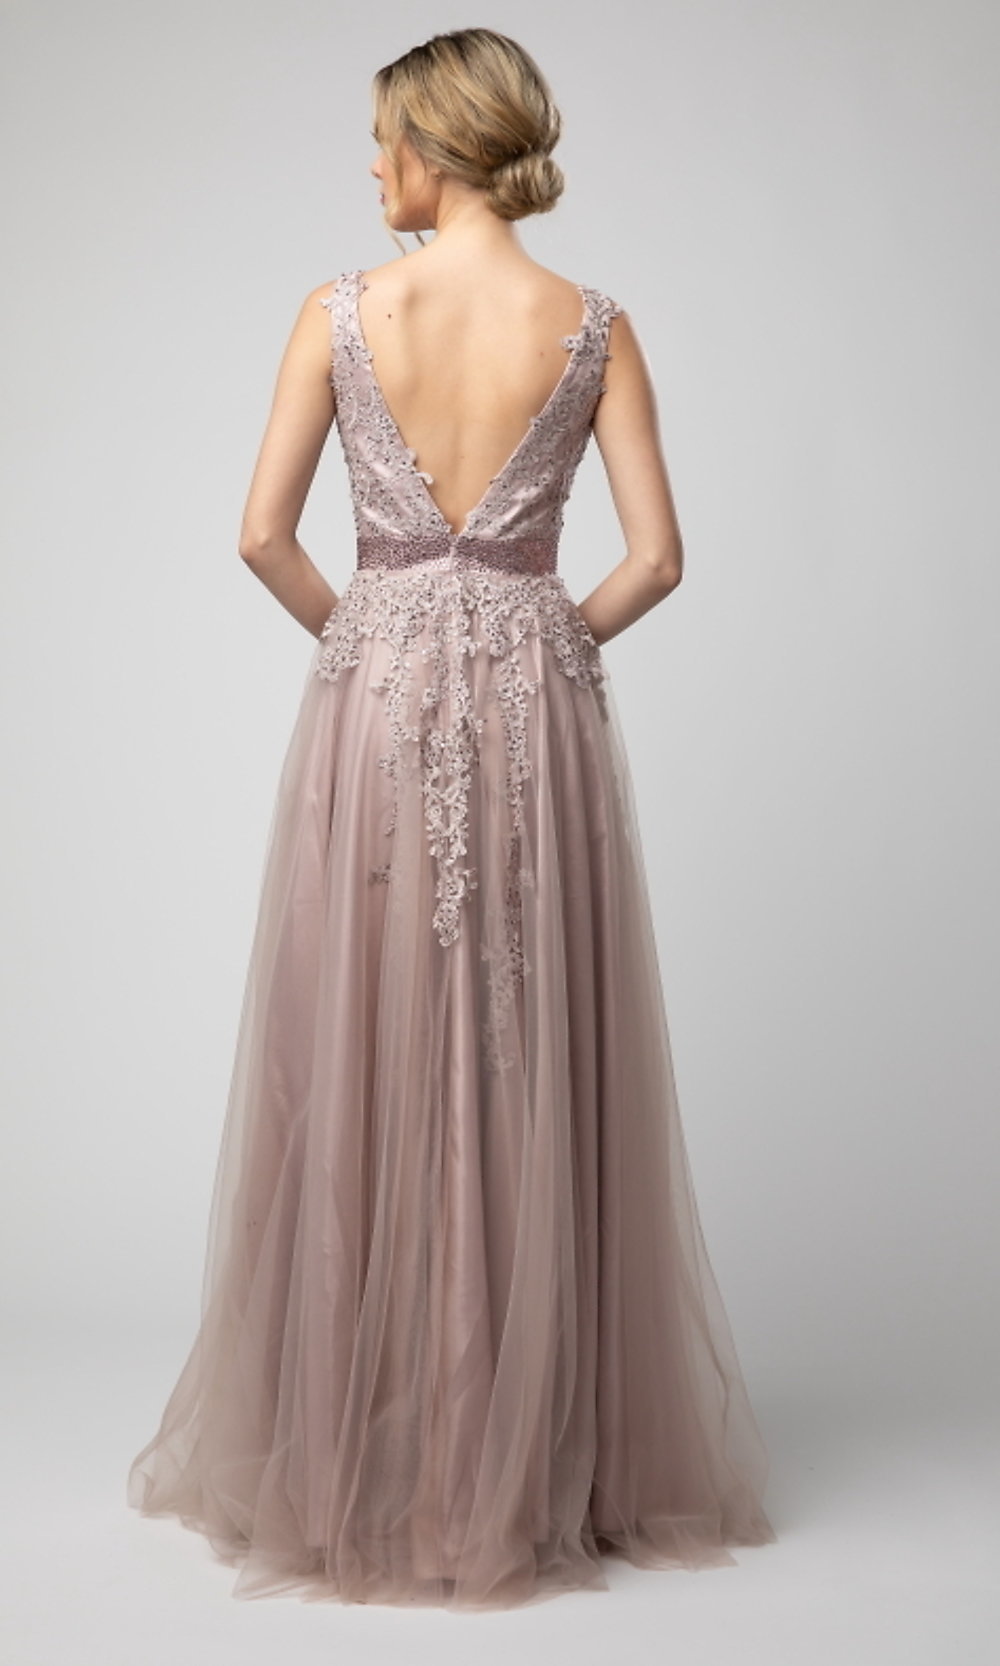 Shail K Long V-Neck Prom Dress with Embroidery